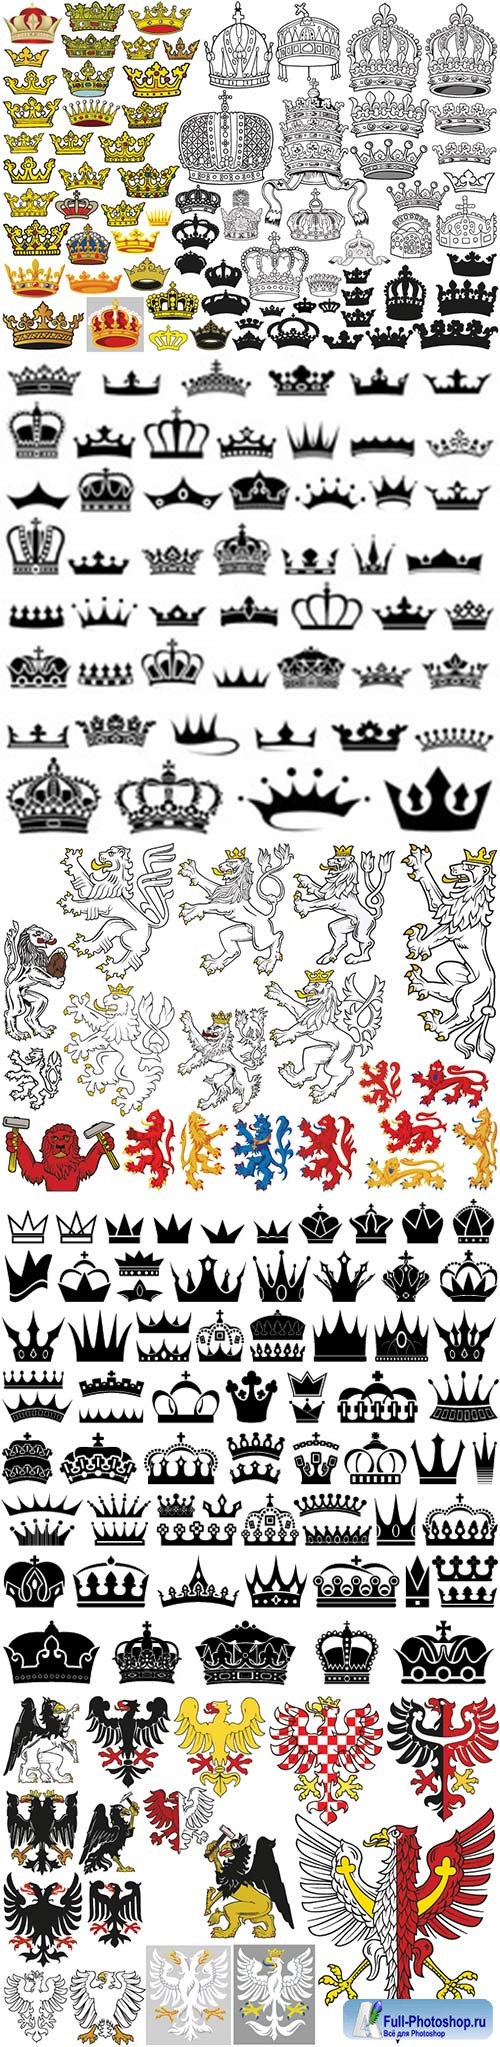 Big set of heraldic crowns in colored illustrations